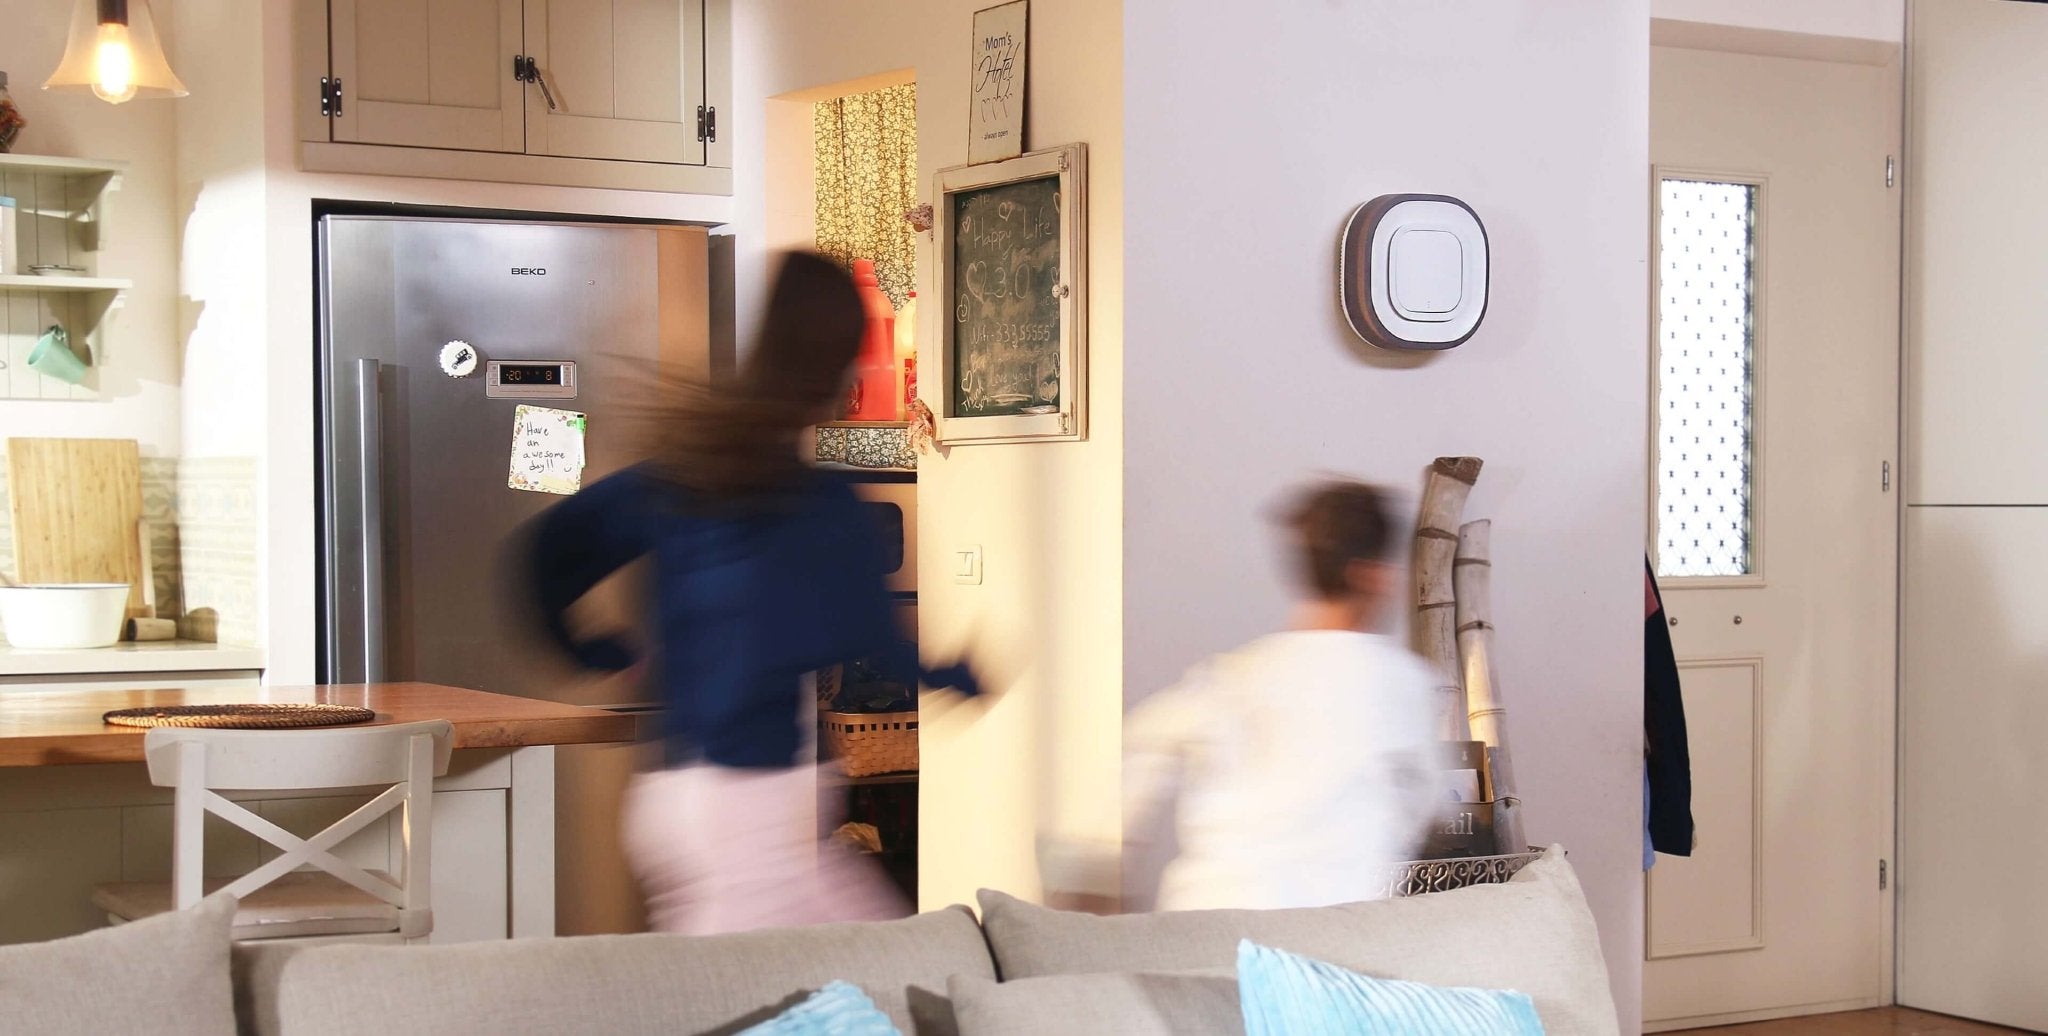 A blurred image of a woman and girl passing an Aura Air Purifier as they exit a kitchen